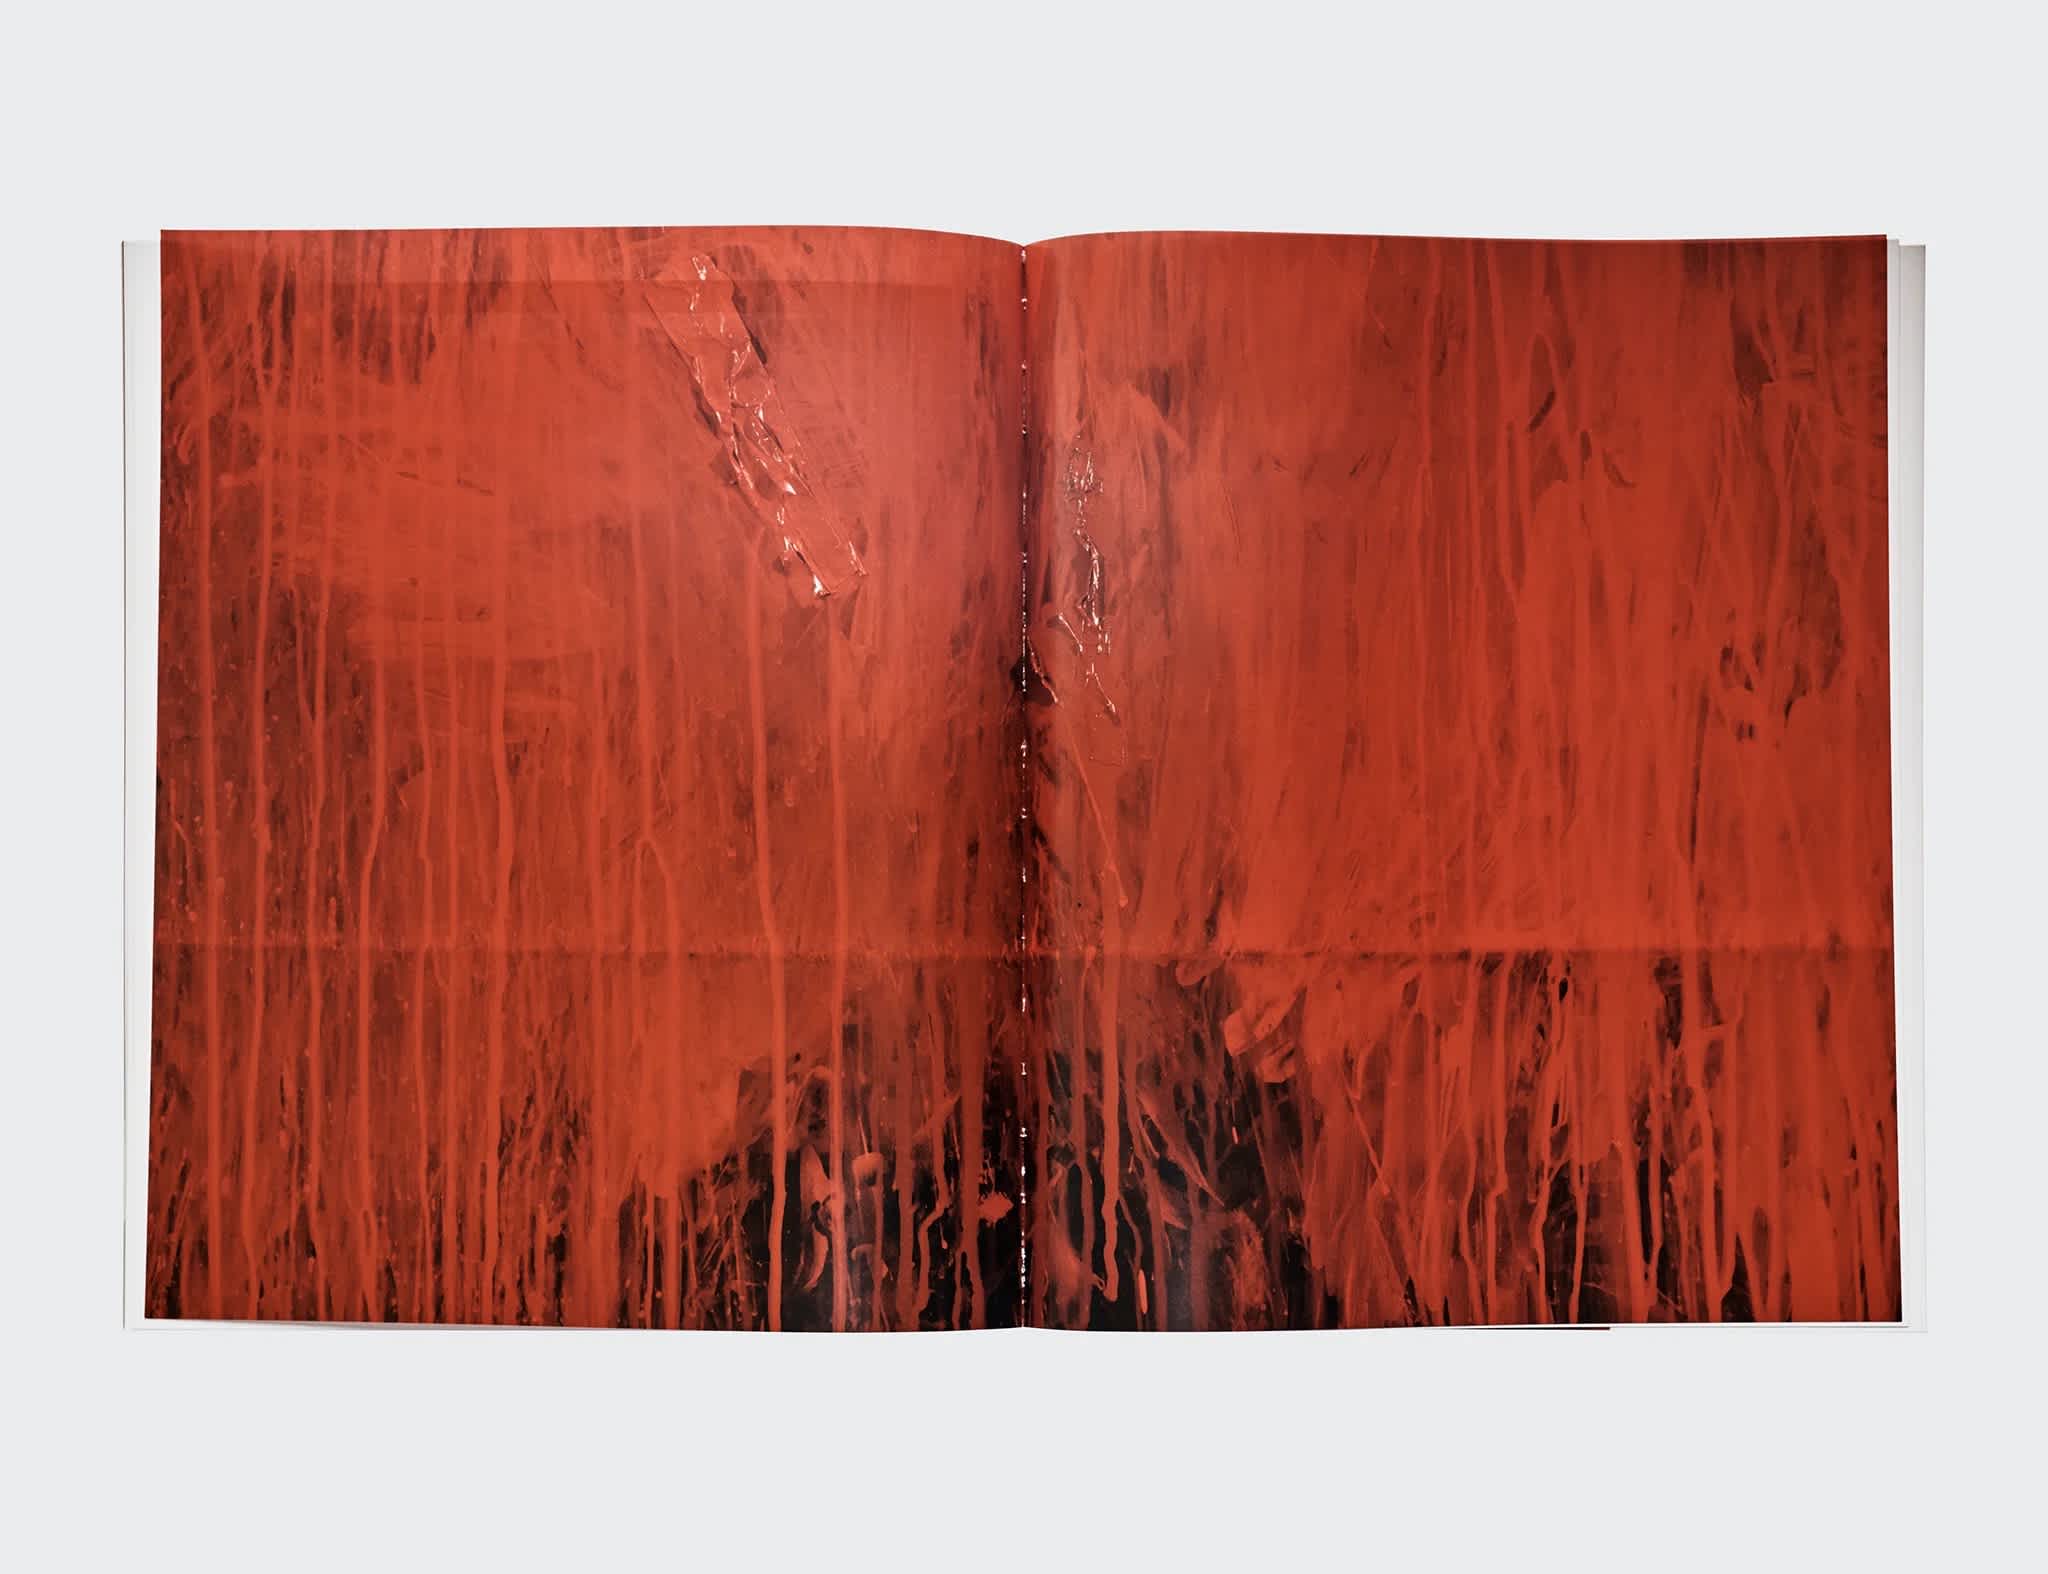 Interior of a book imposed on a white background. The left and right pages feature a centerfold of the painter Reginald Sylvester II's red abstract painting.